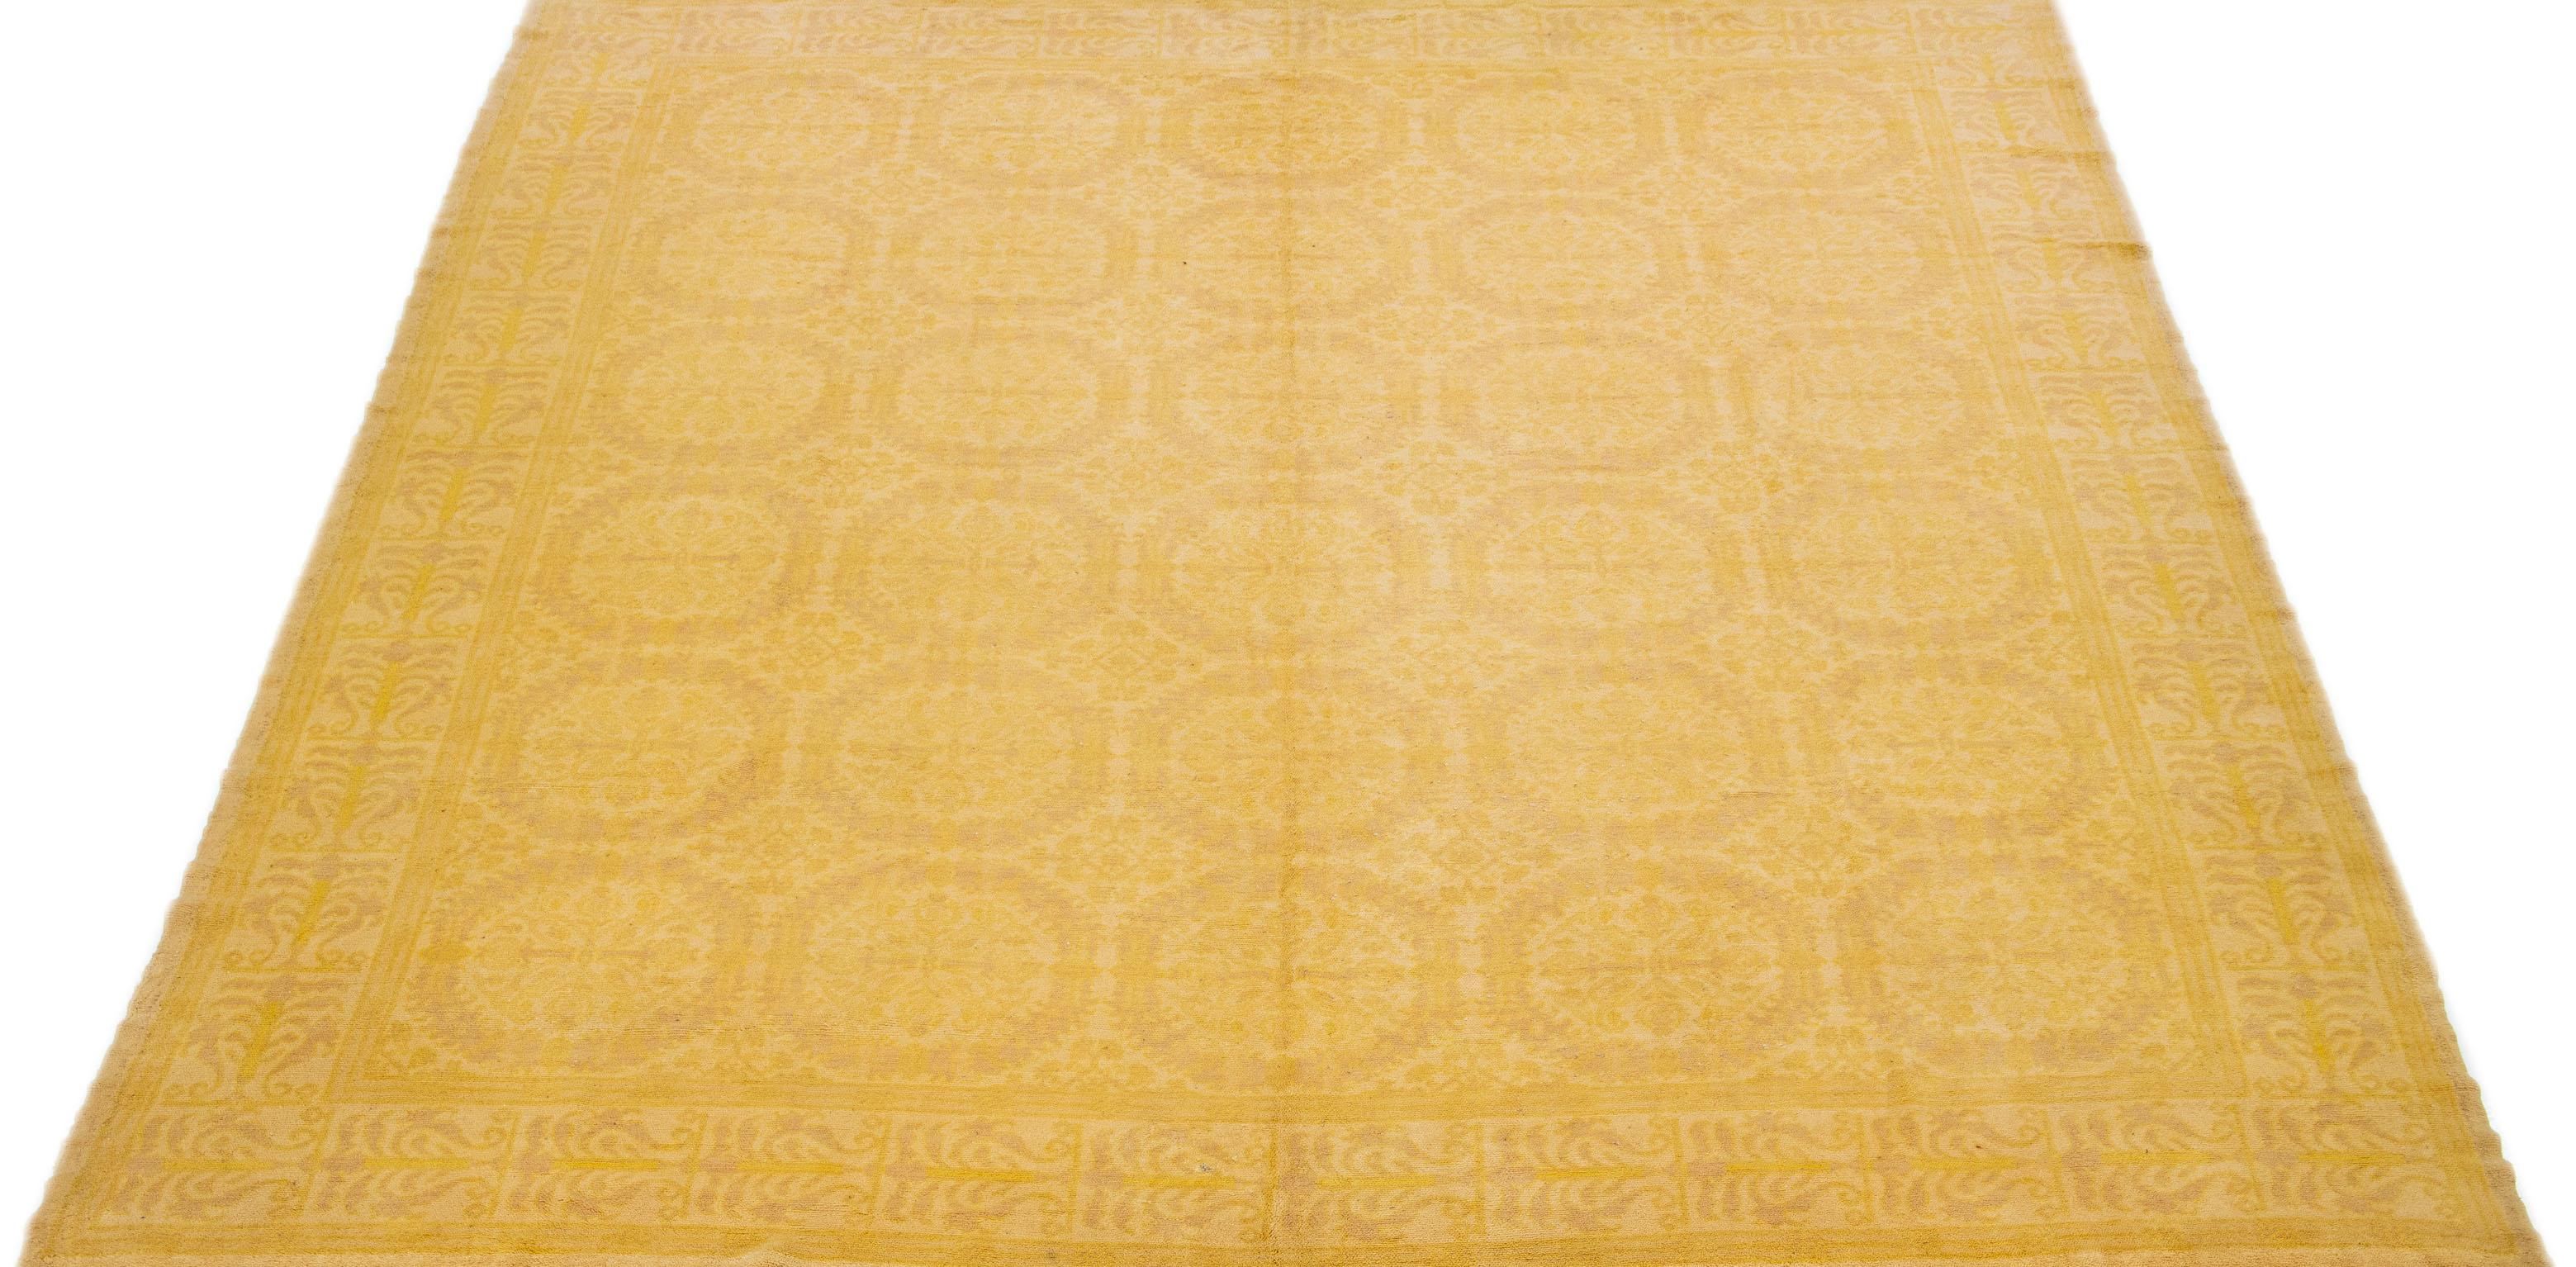 This hand-knotted wool rug boasts a beautiful vintage Spanish design featuring a goldenrod field color accentuated with stunning beige and tan accents in an elegant all-over pattern.

This rug measures 10'1